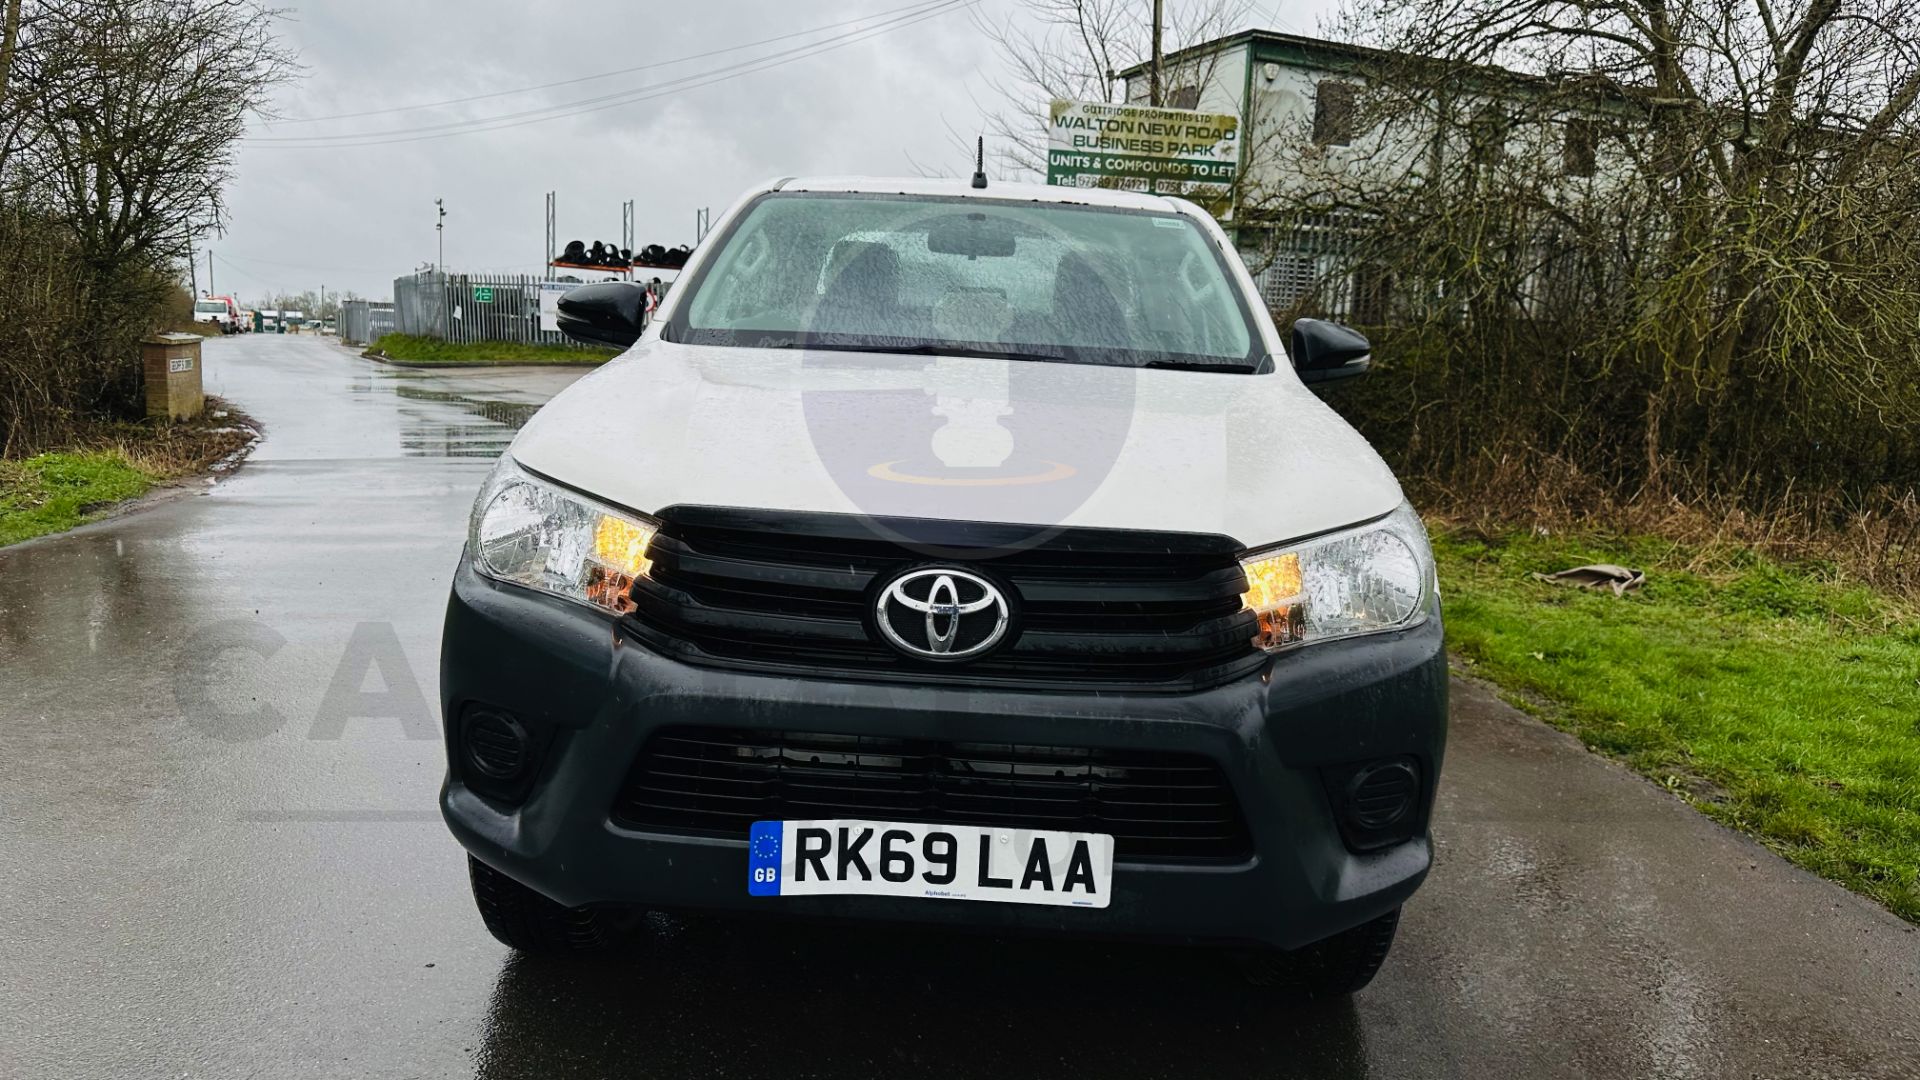 TOYOTA HILUX *DOUBLE CAB PICK-UP* (2020 - EURO 6) 2.4 D-4D - AUTO STOP/START *AIR CON* (1 OWNER) - Image 8 of 48